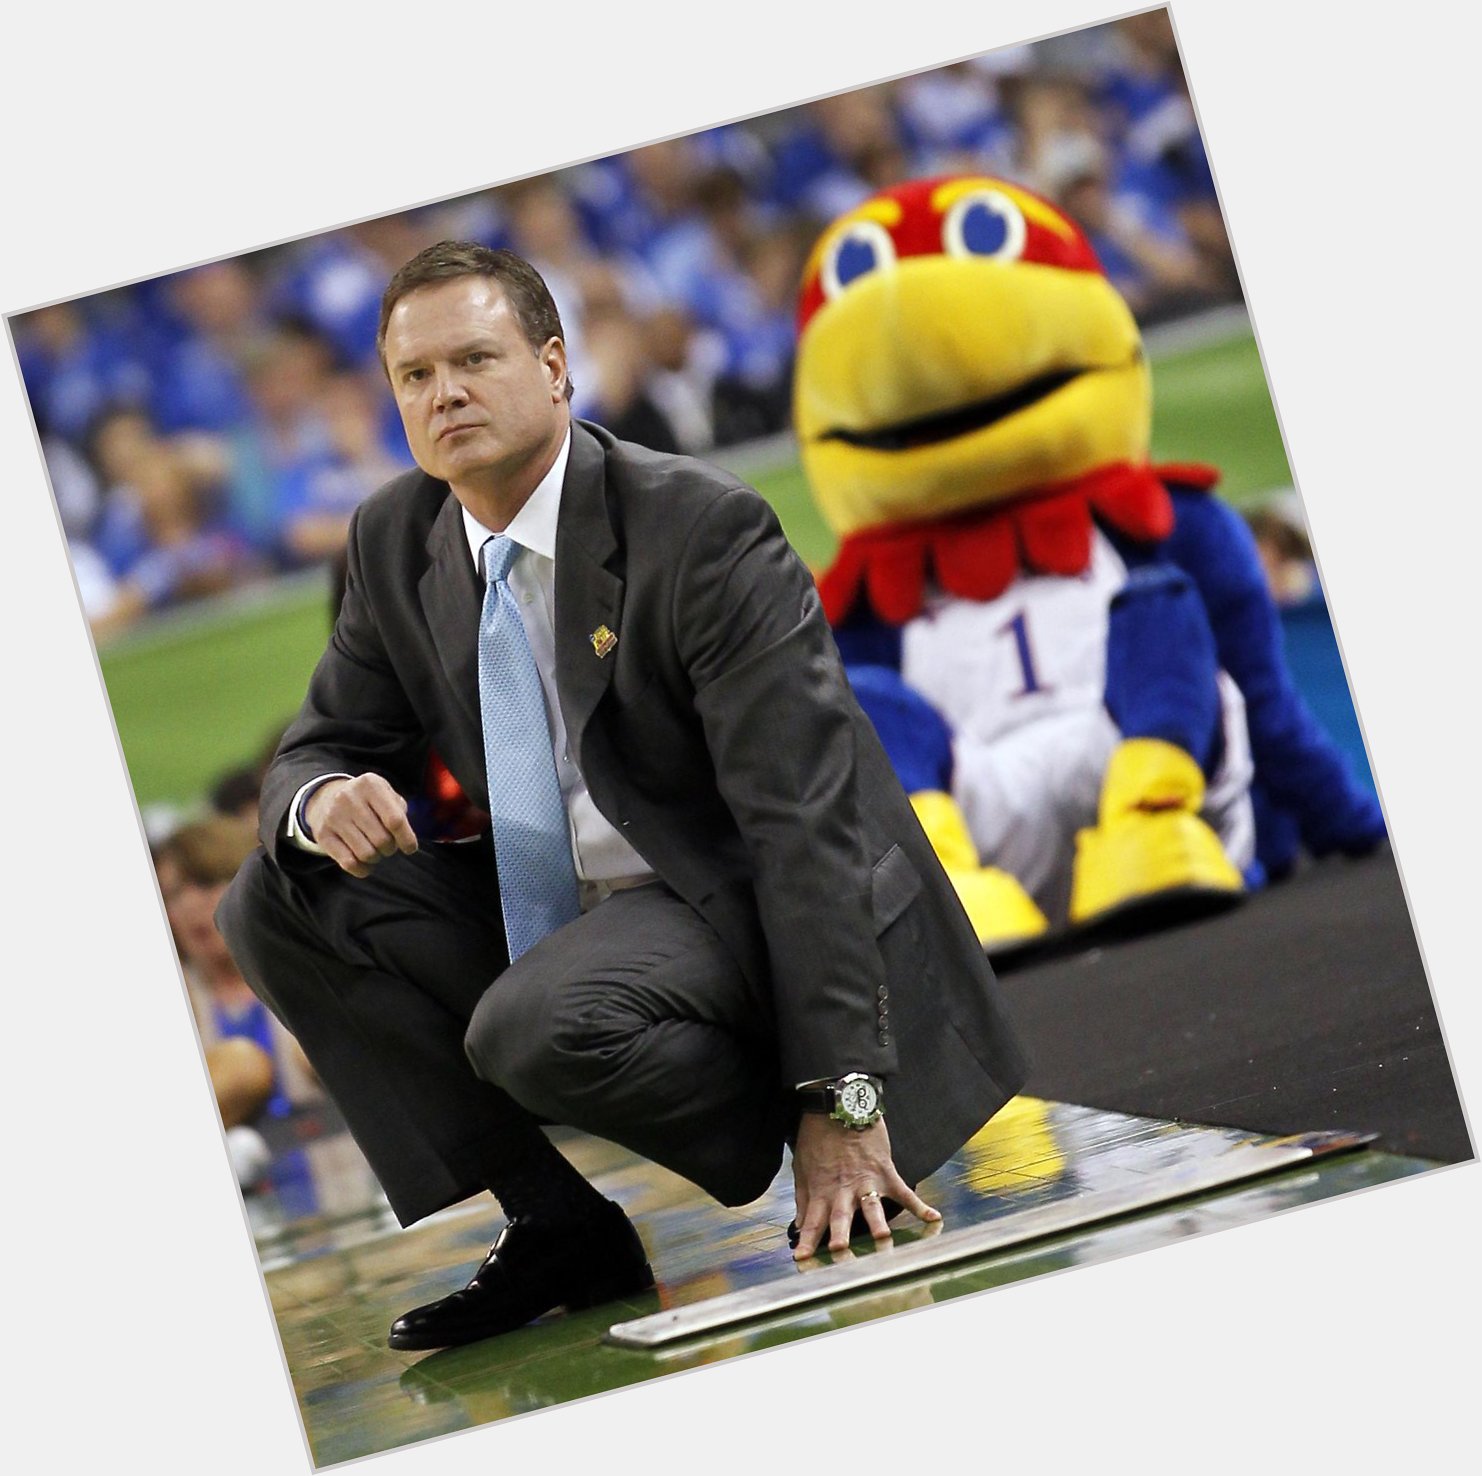 Happy Birthday to Bill Self, who turns 52 today! 